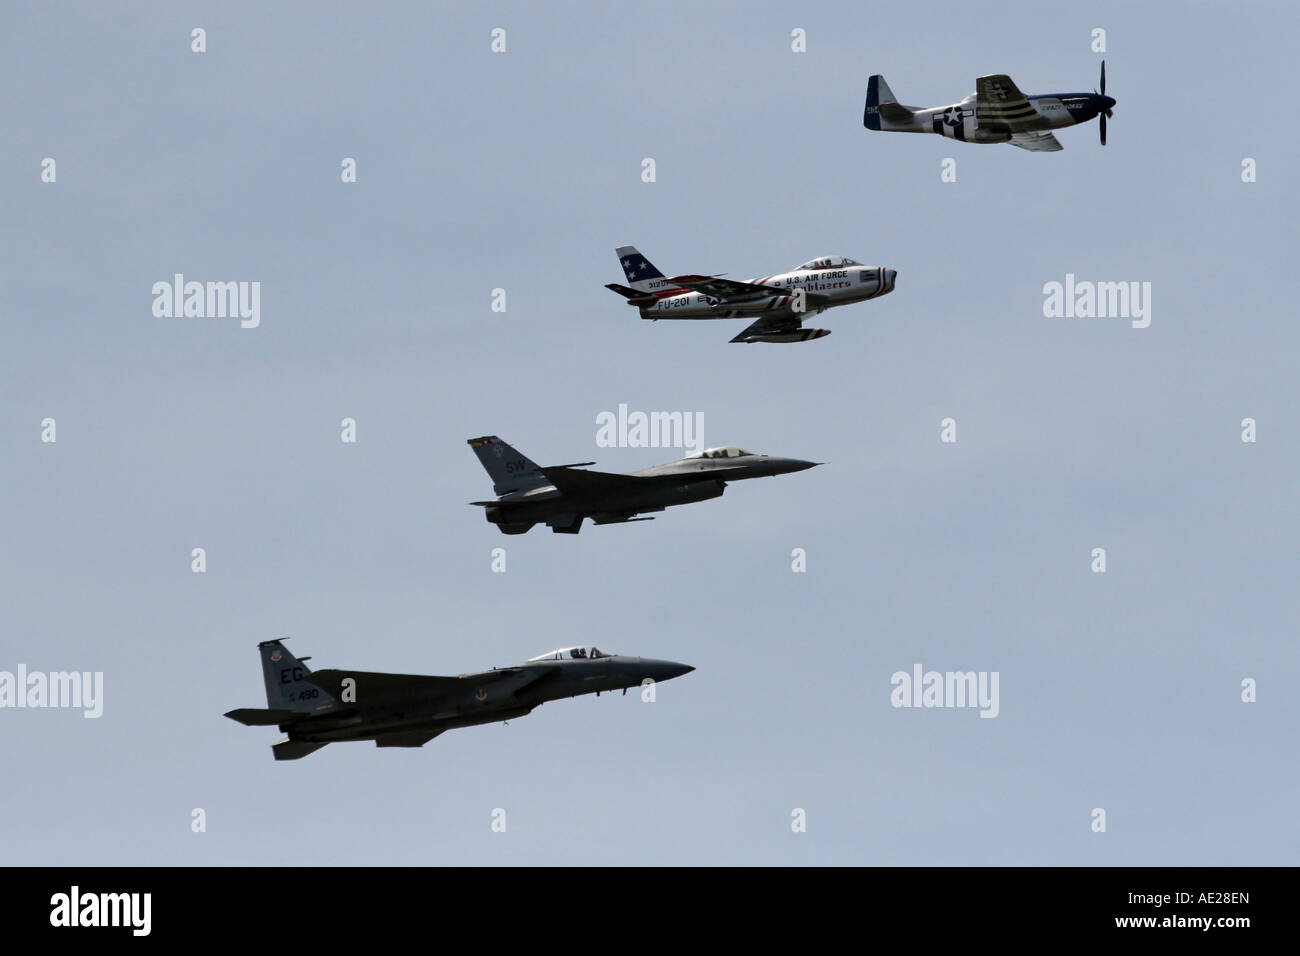 A Mustang P-51, F-86F Sabre Jet, F-16 Falcon F-15 Strike Eagle Perform the Heritage Flight Stock Photo